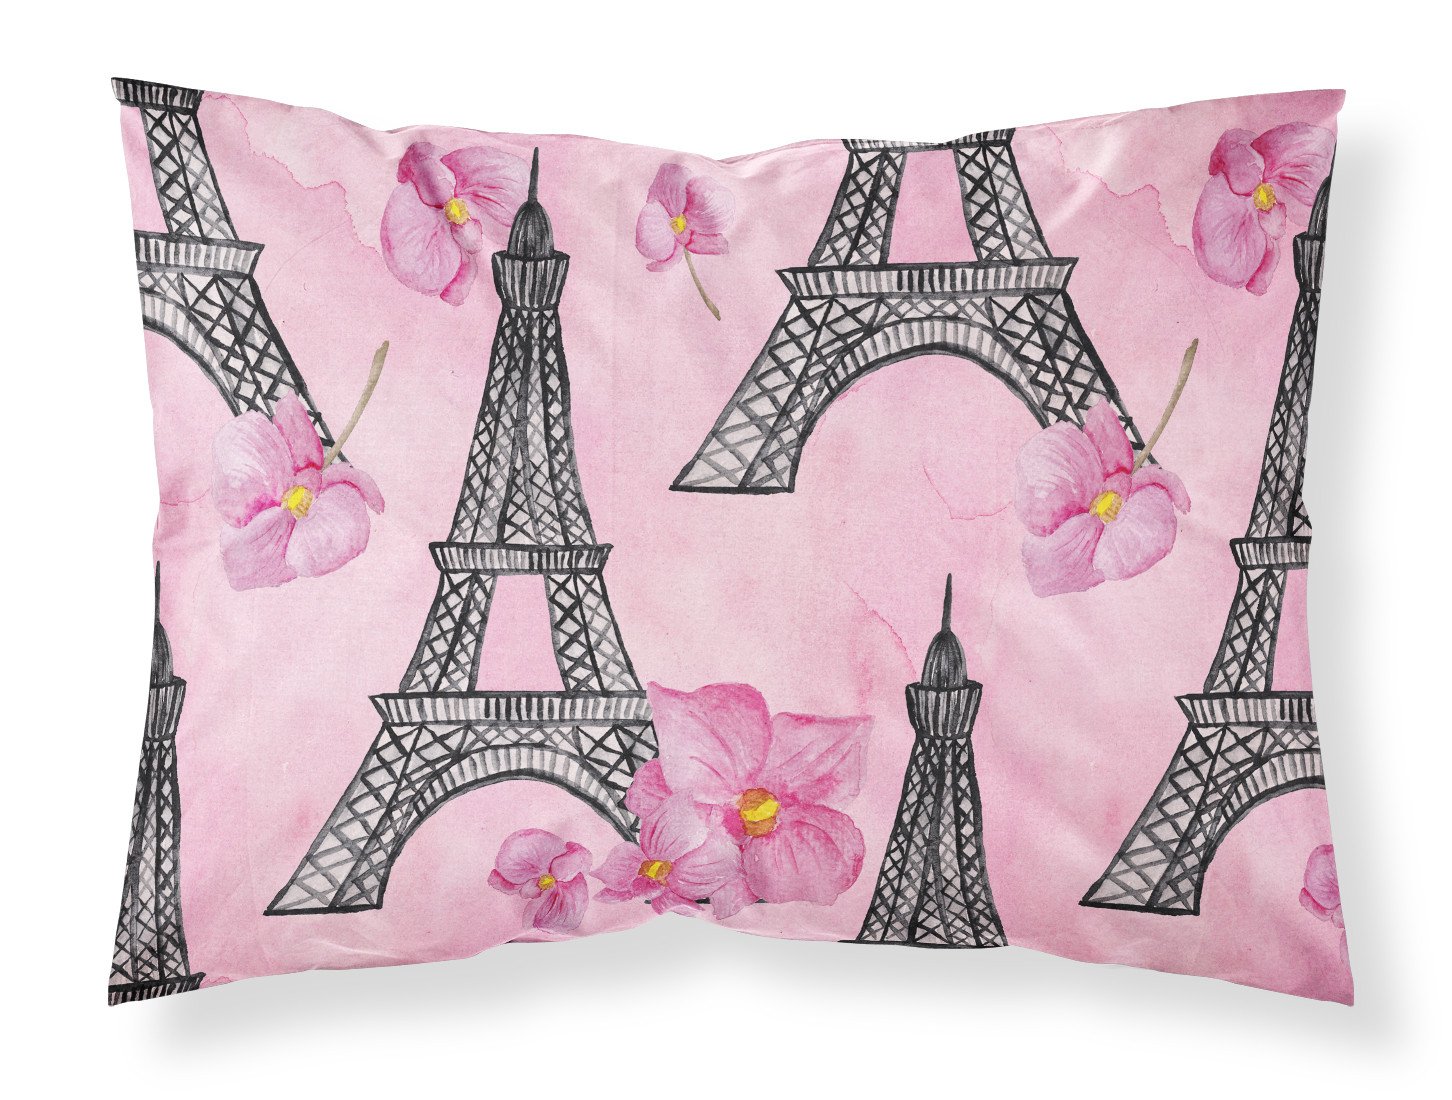 Watercolor Pink Flowers and Eiffel Tower Fabric Standard Pillowcase BB7511PILLOWCASE by Caroline's Treasures